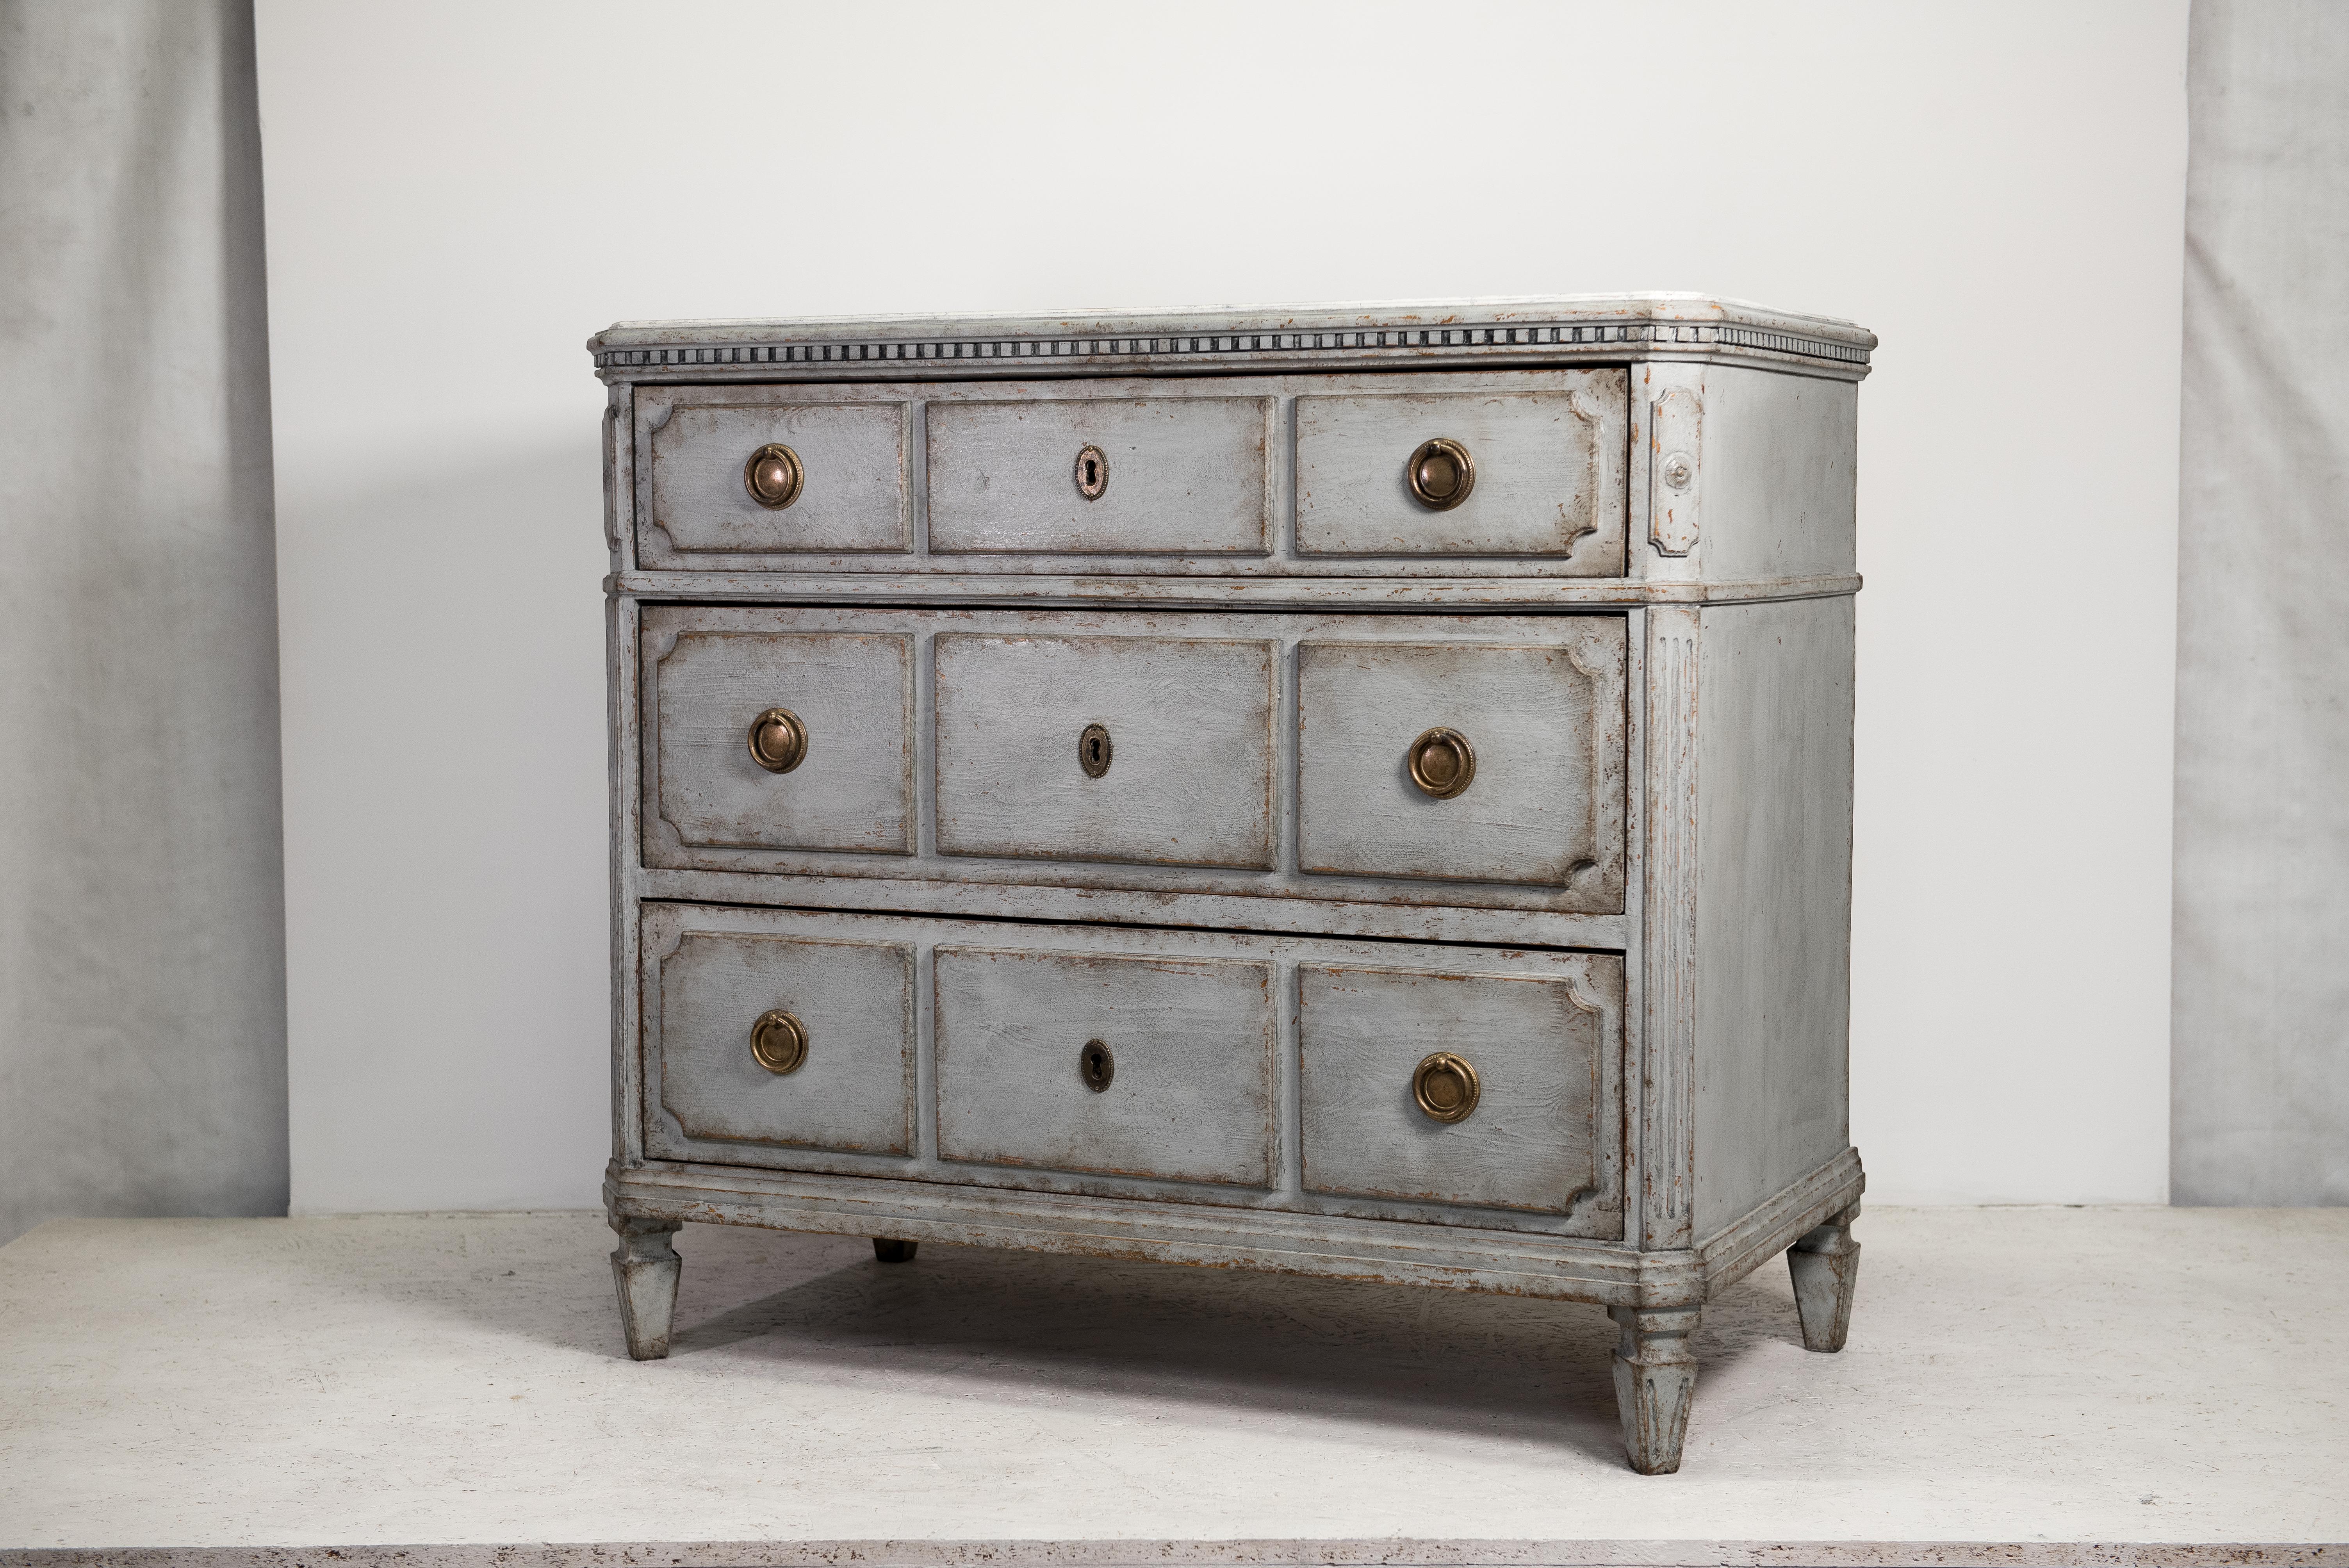 Please note - this item will be available to ship from early march 2022

C 1850 antique Swedish Gustavian painted chest of 4 drawers commode with detailed decorative motifs on the top rail, front and brass detailing.

It has 4 drawers with brass